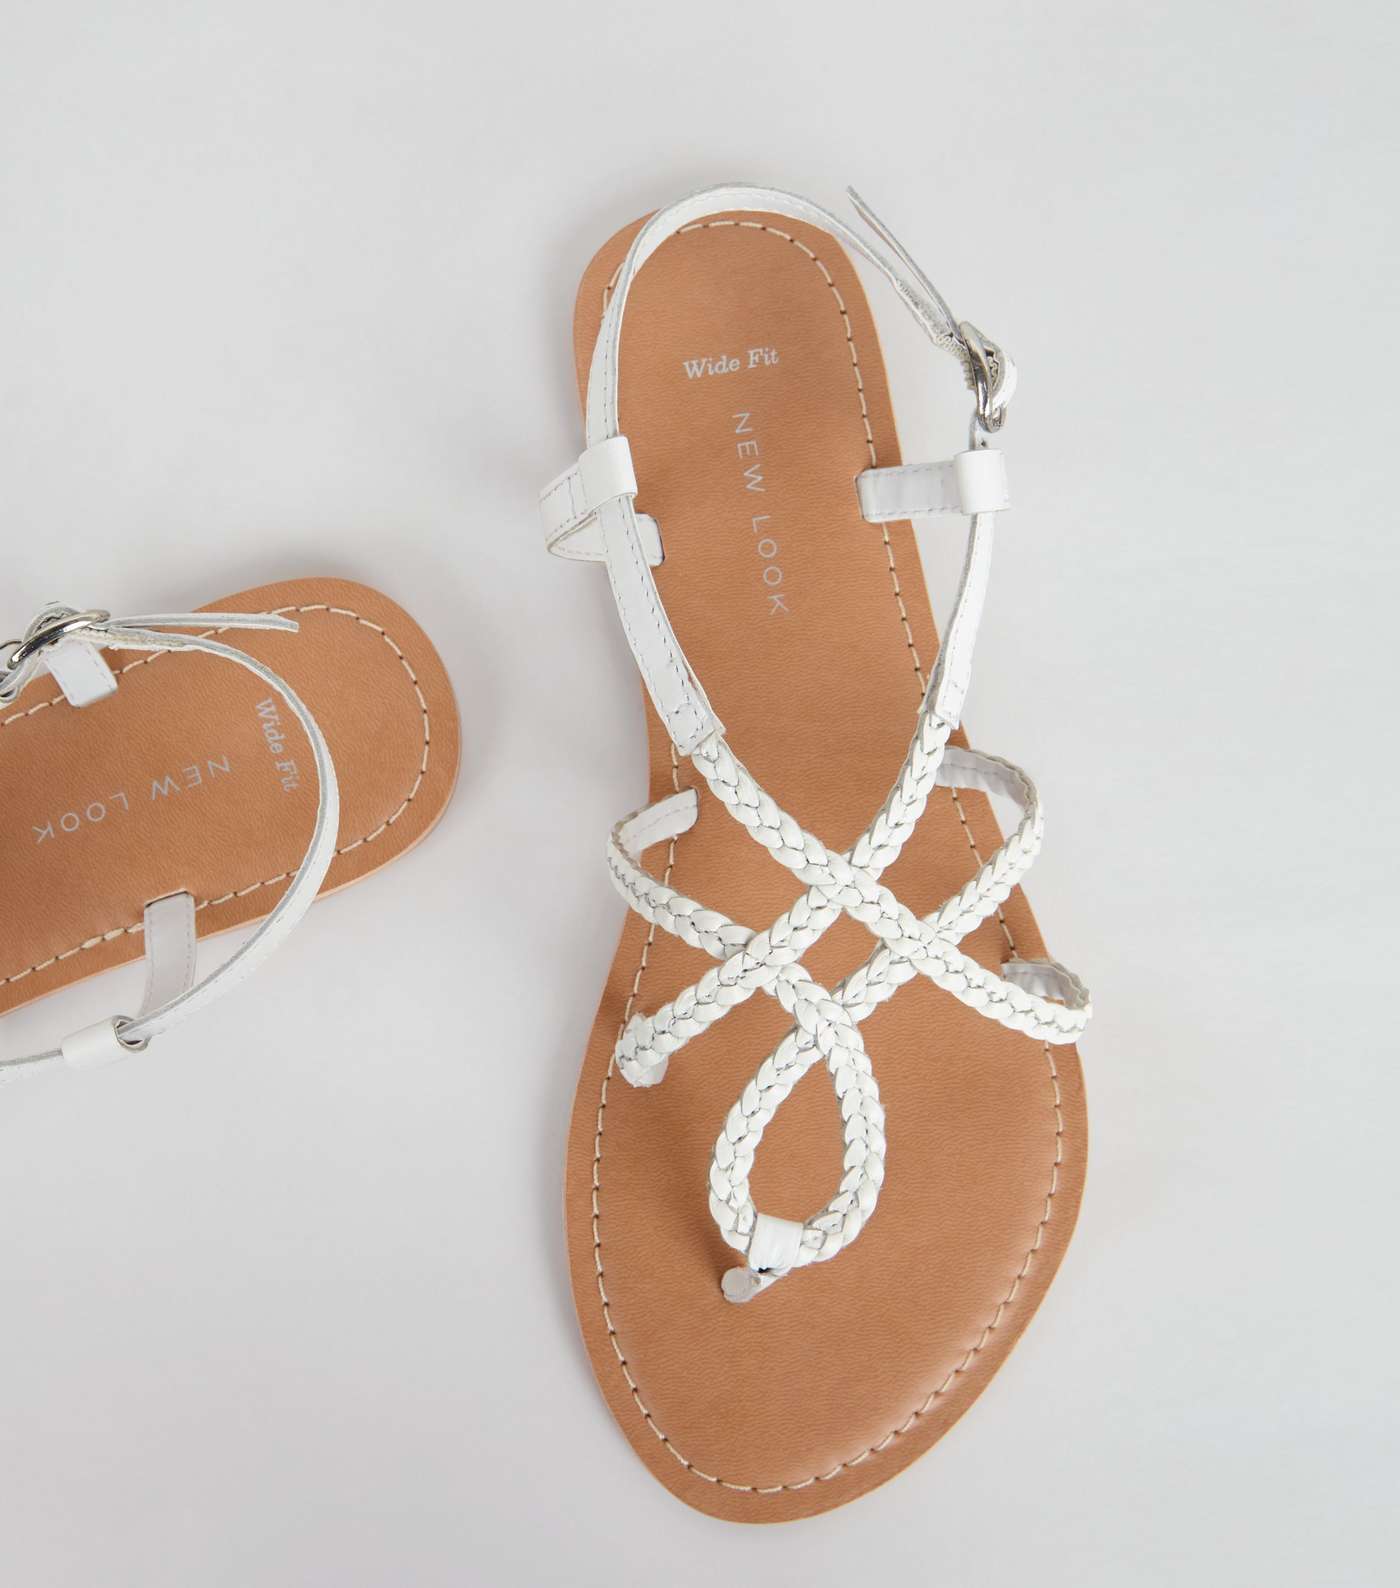 Wide Fit White Leather Plaited Sandals Image 5